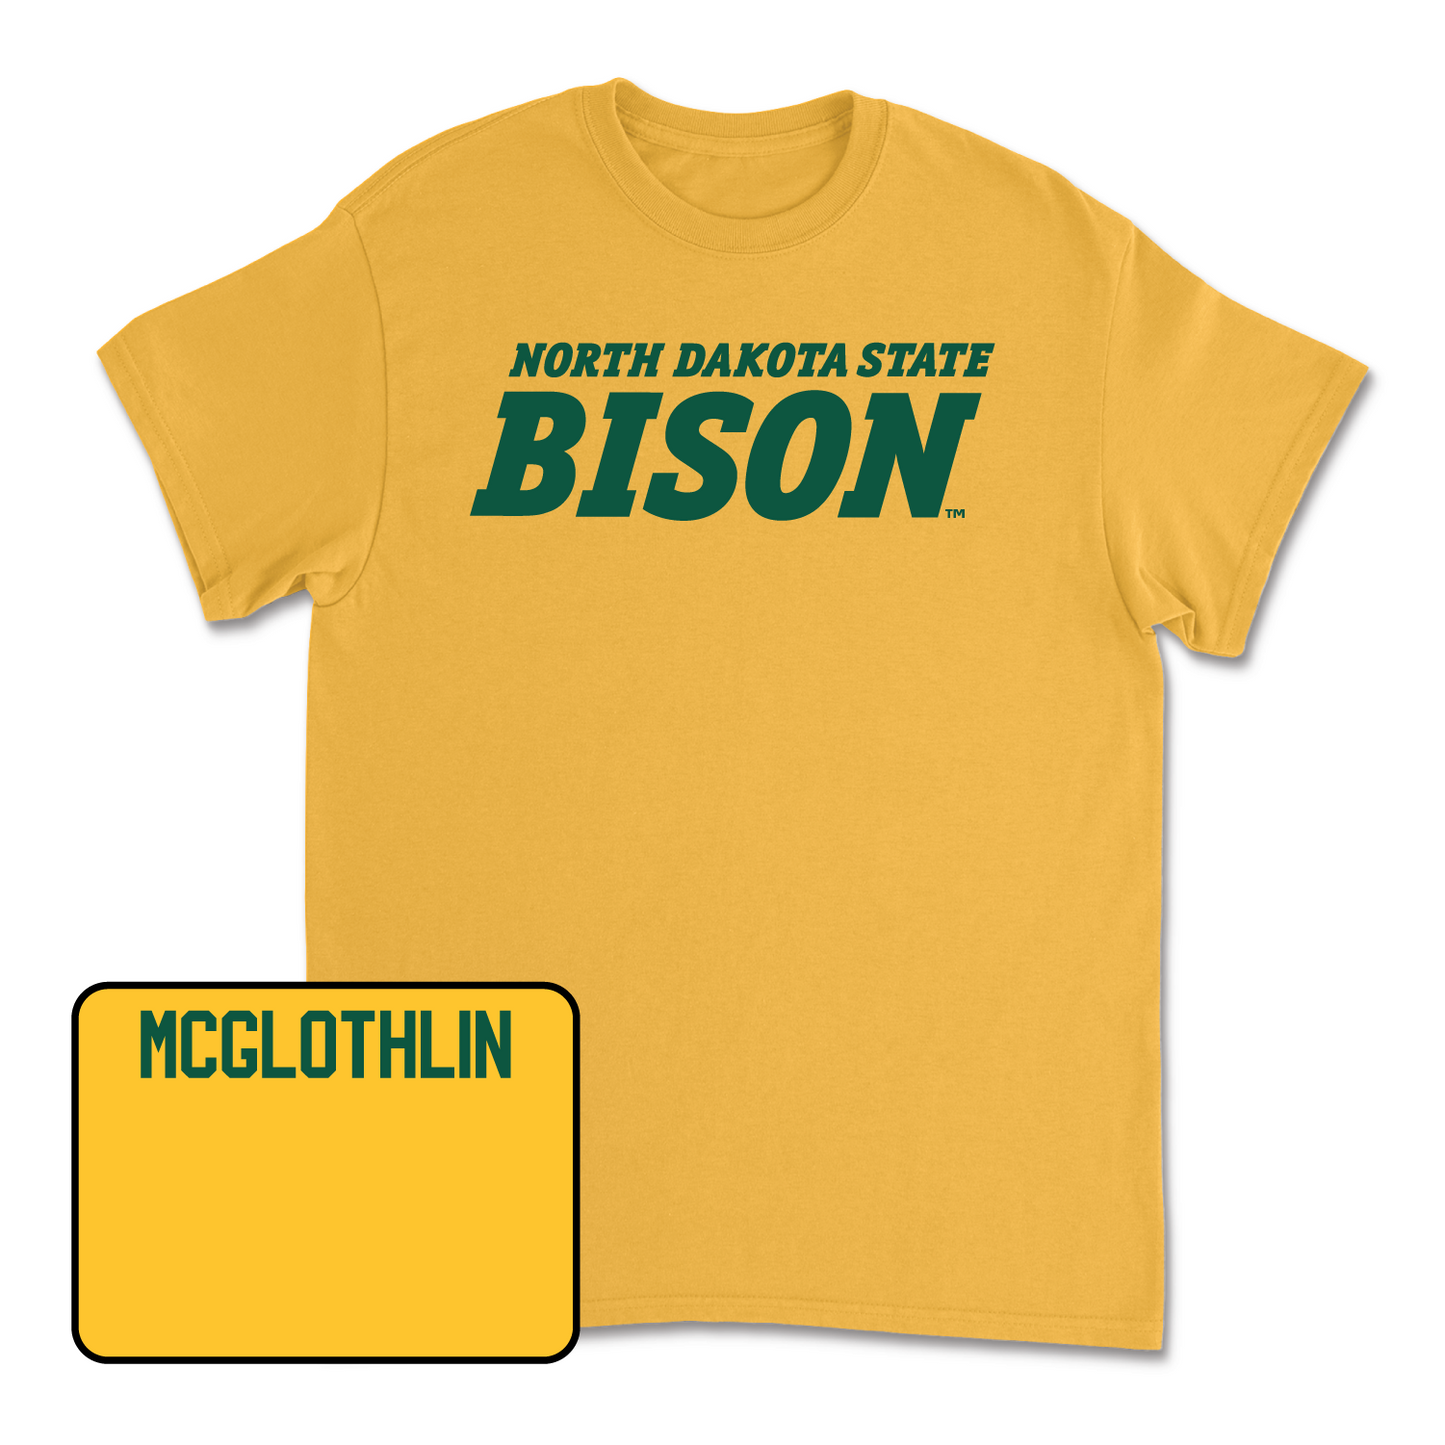 Gold Track & Field Bison Tee Youth Small / Dylan McGlothlin